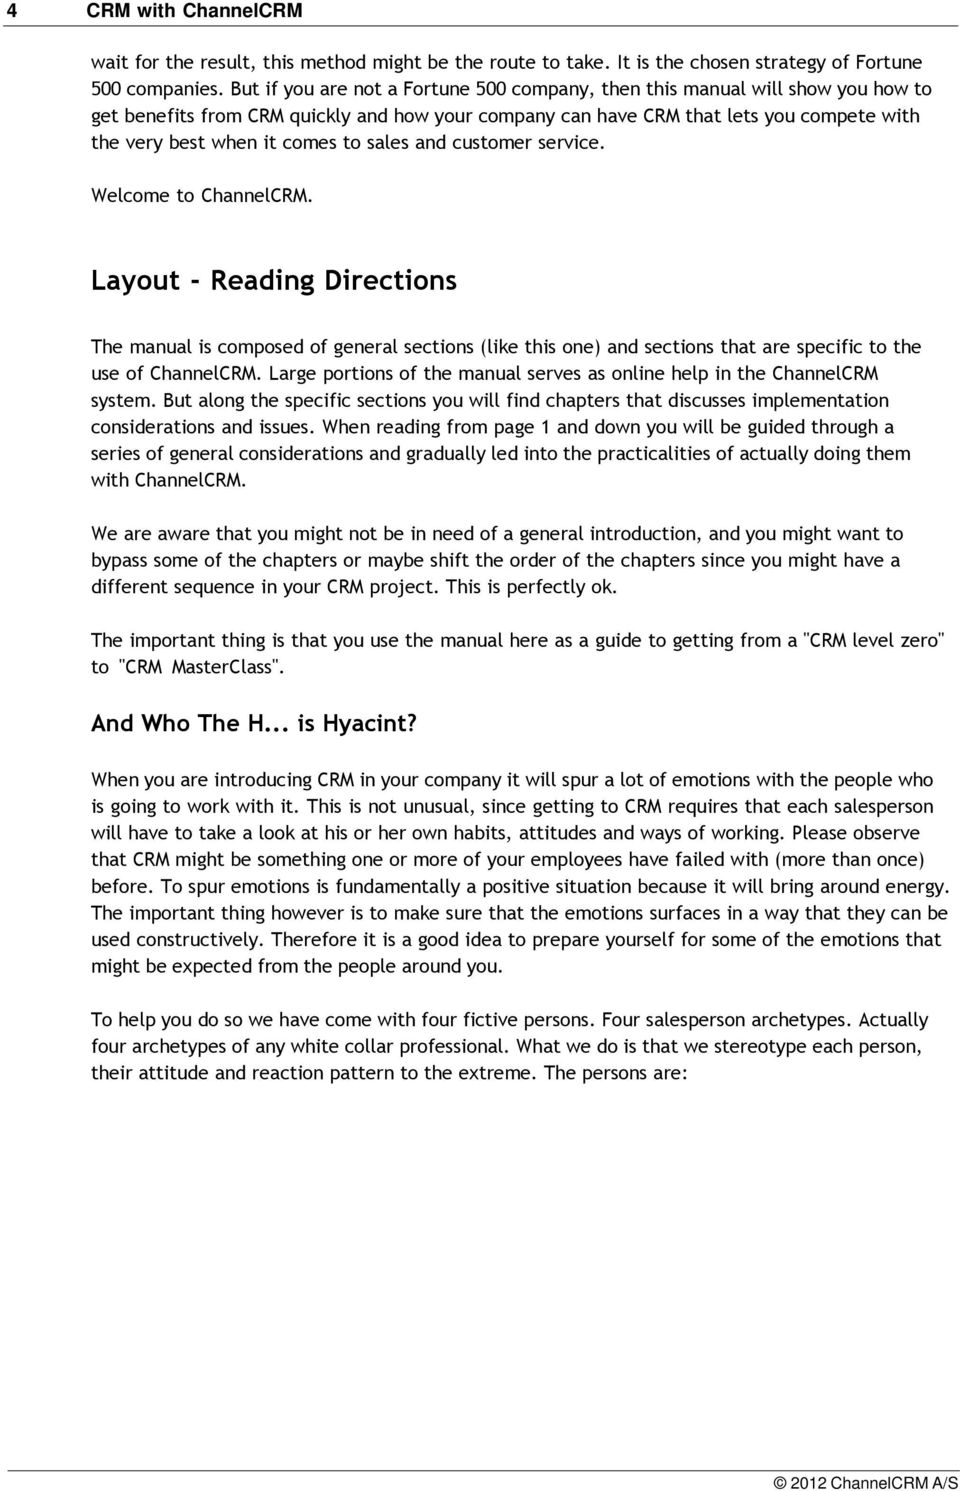 to sales and customer service. Welcome to ChannelCRM. Layout - Reading Directions The manual is composed of general sections (like this one) and sections that are specific to the use of ChannelCRM.